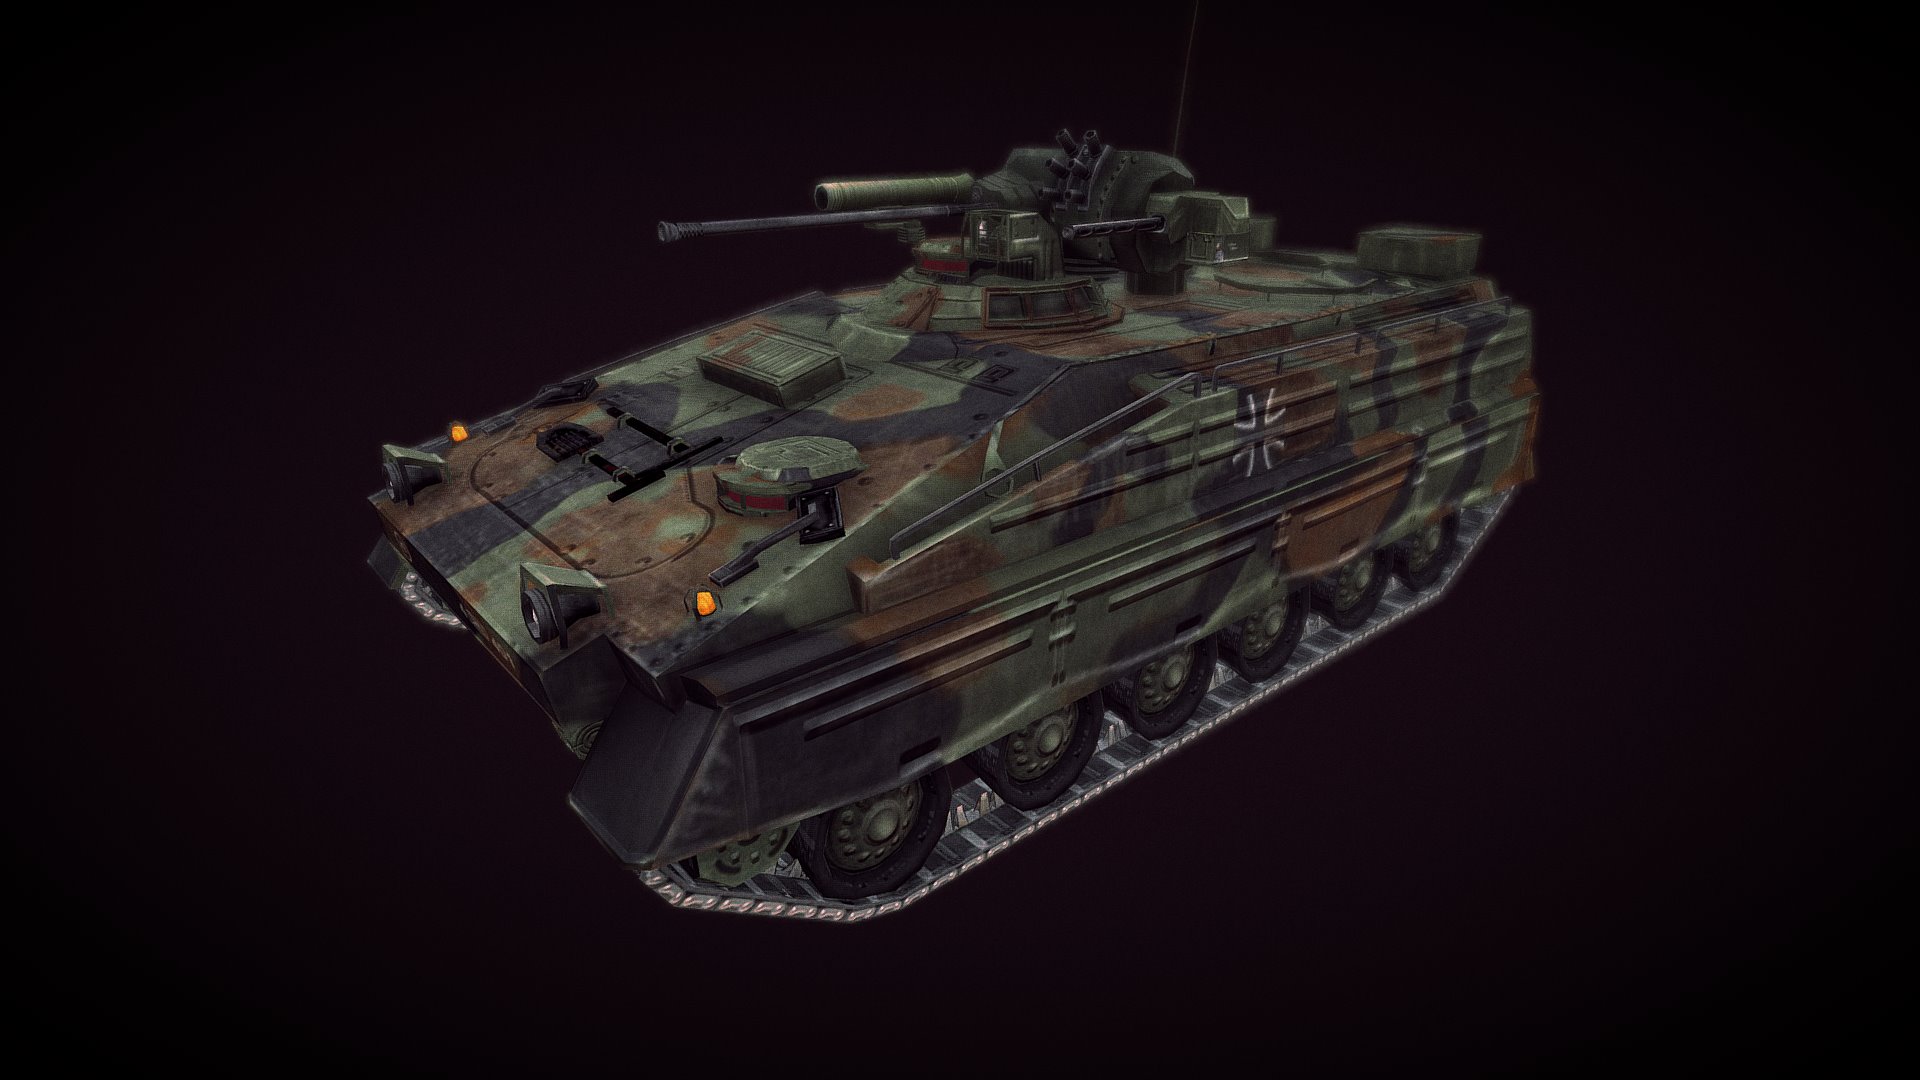 Marder apc created in 2005 for point of existence:2 - Marder APC - 3D model by pieterkuijt 3d model